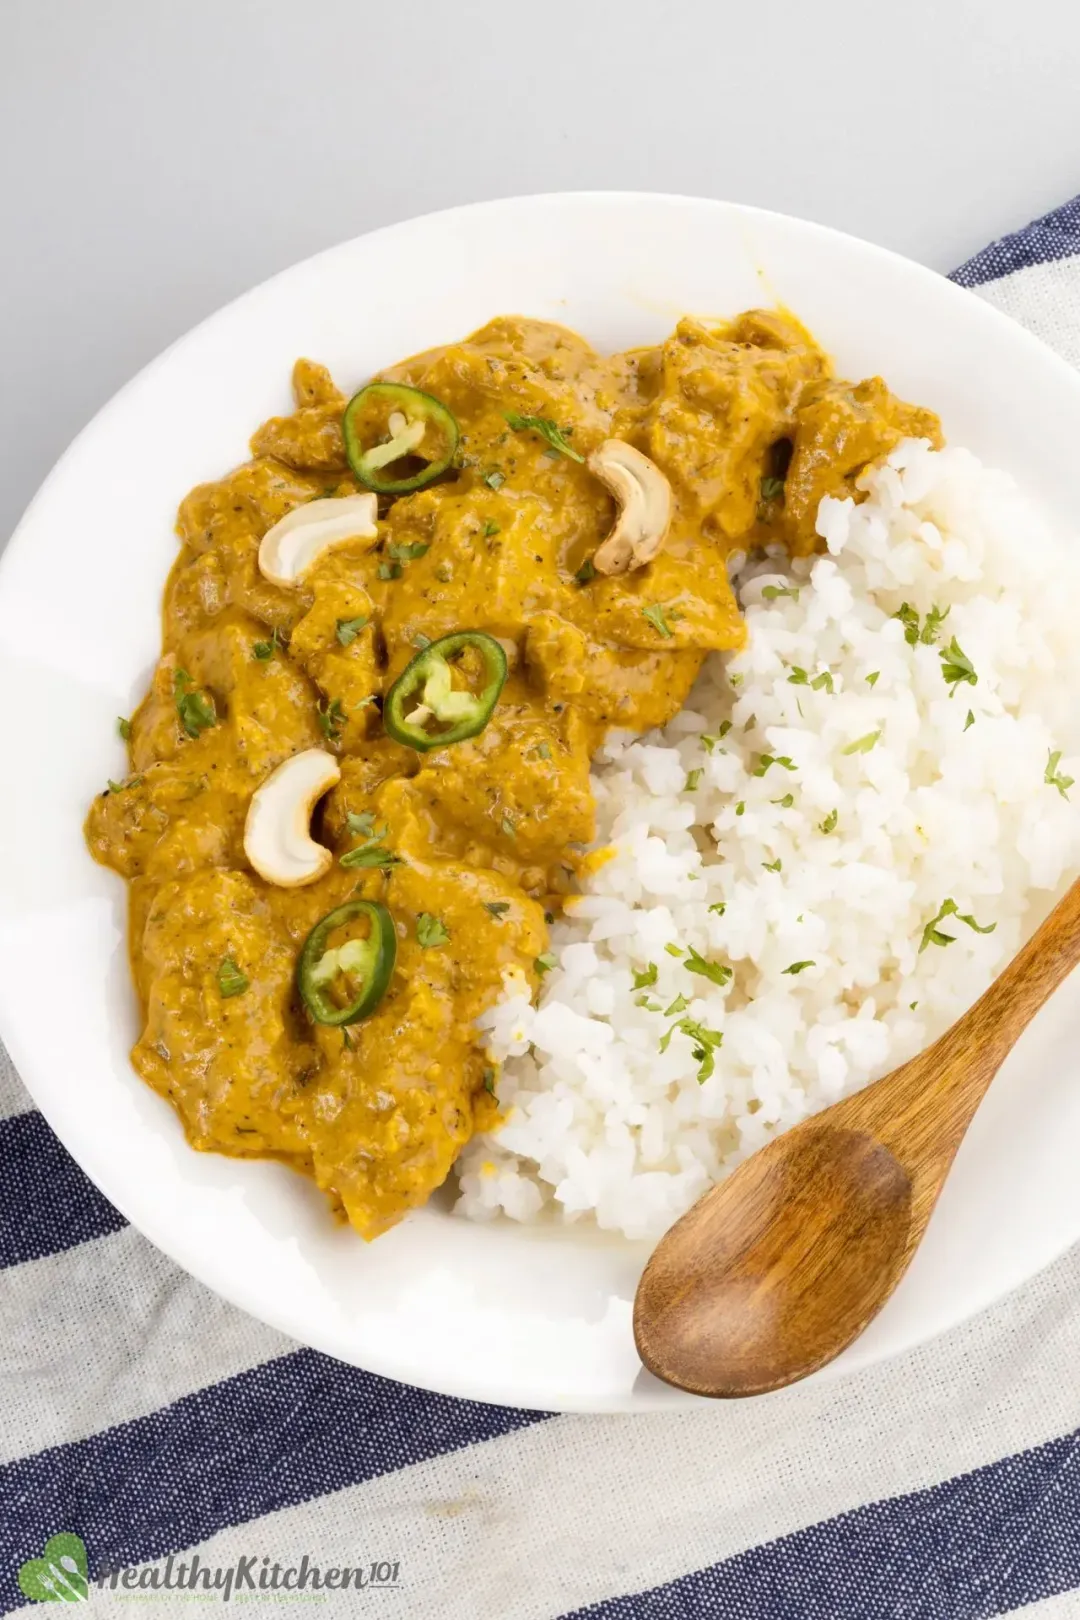 A dish of cooked rice and chicken korma, topped with halved cashews and sliced jalapeños